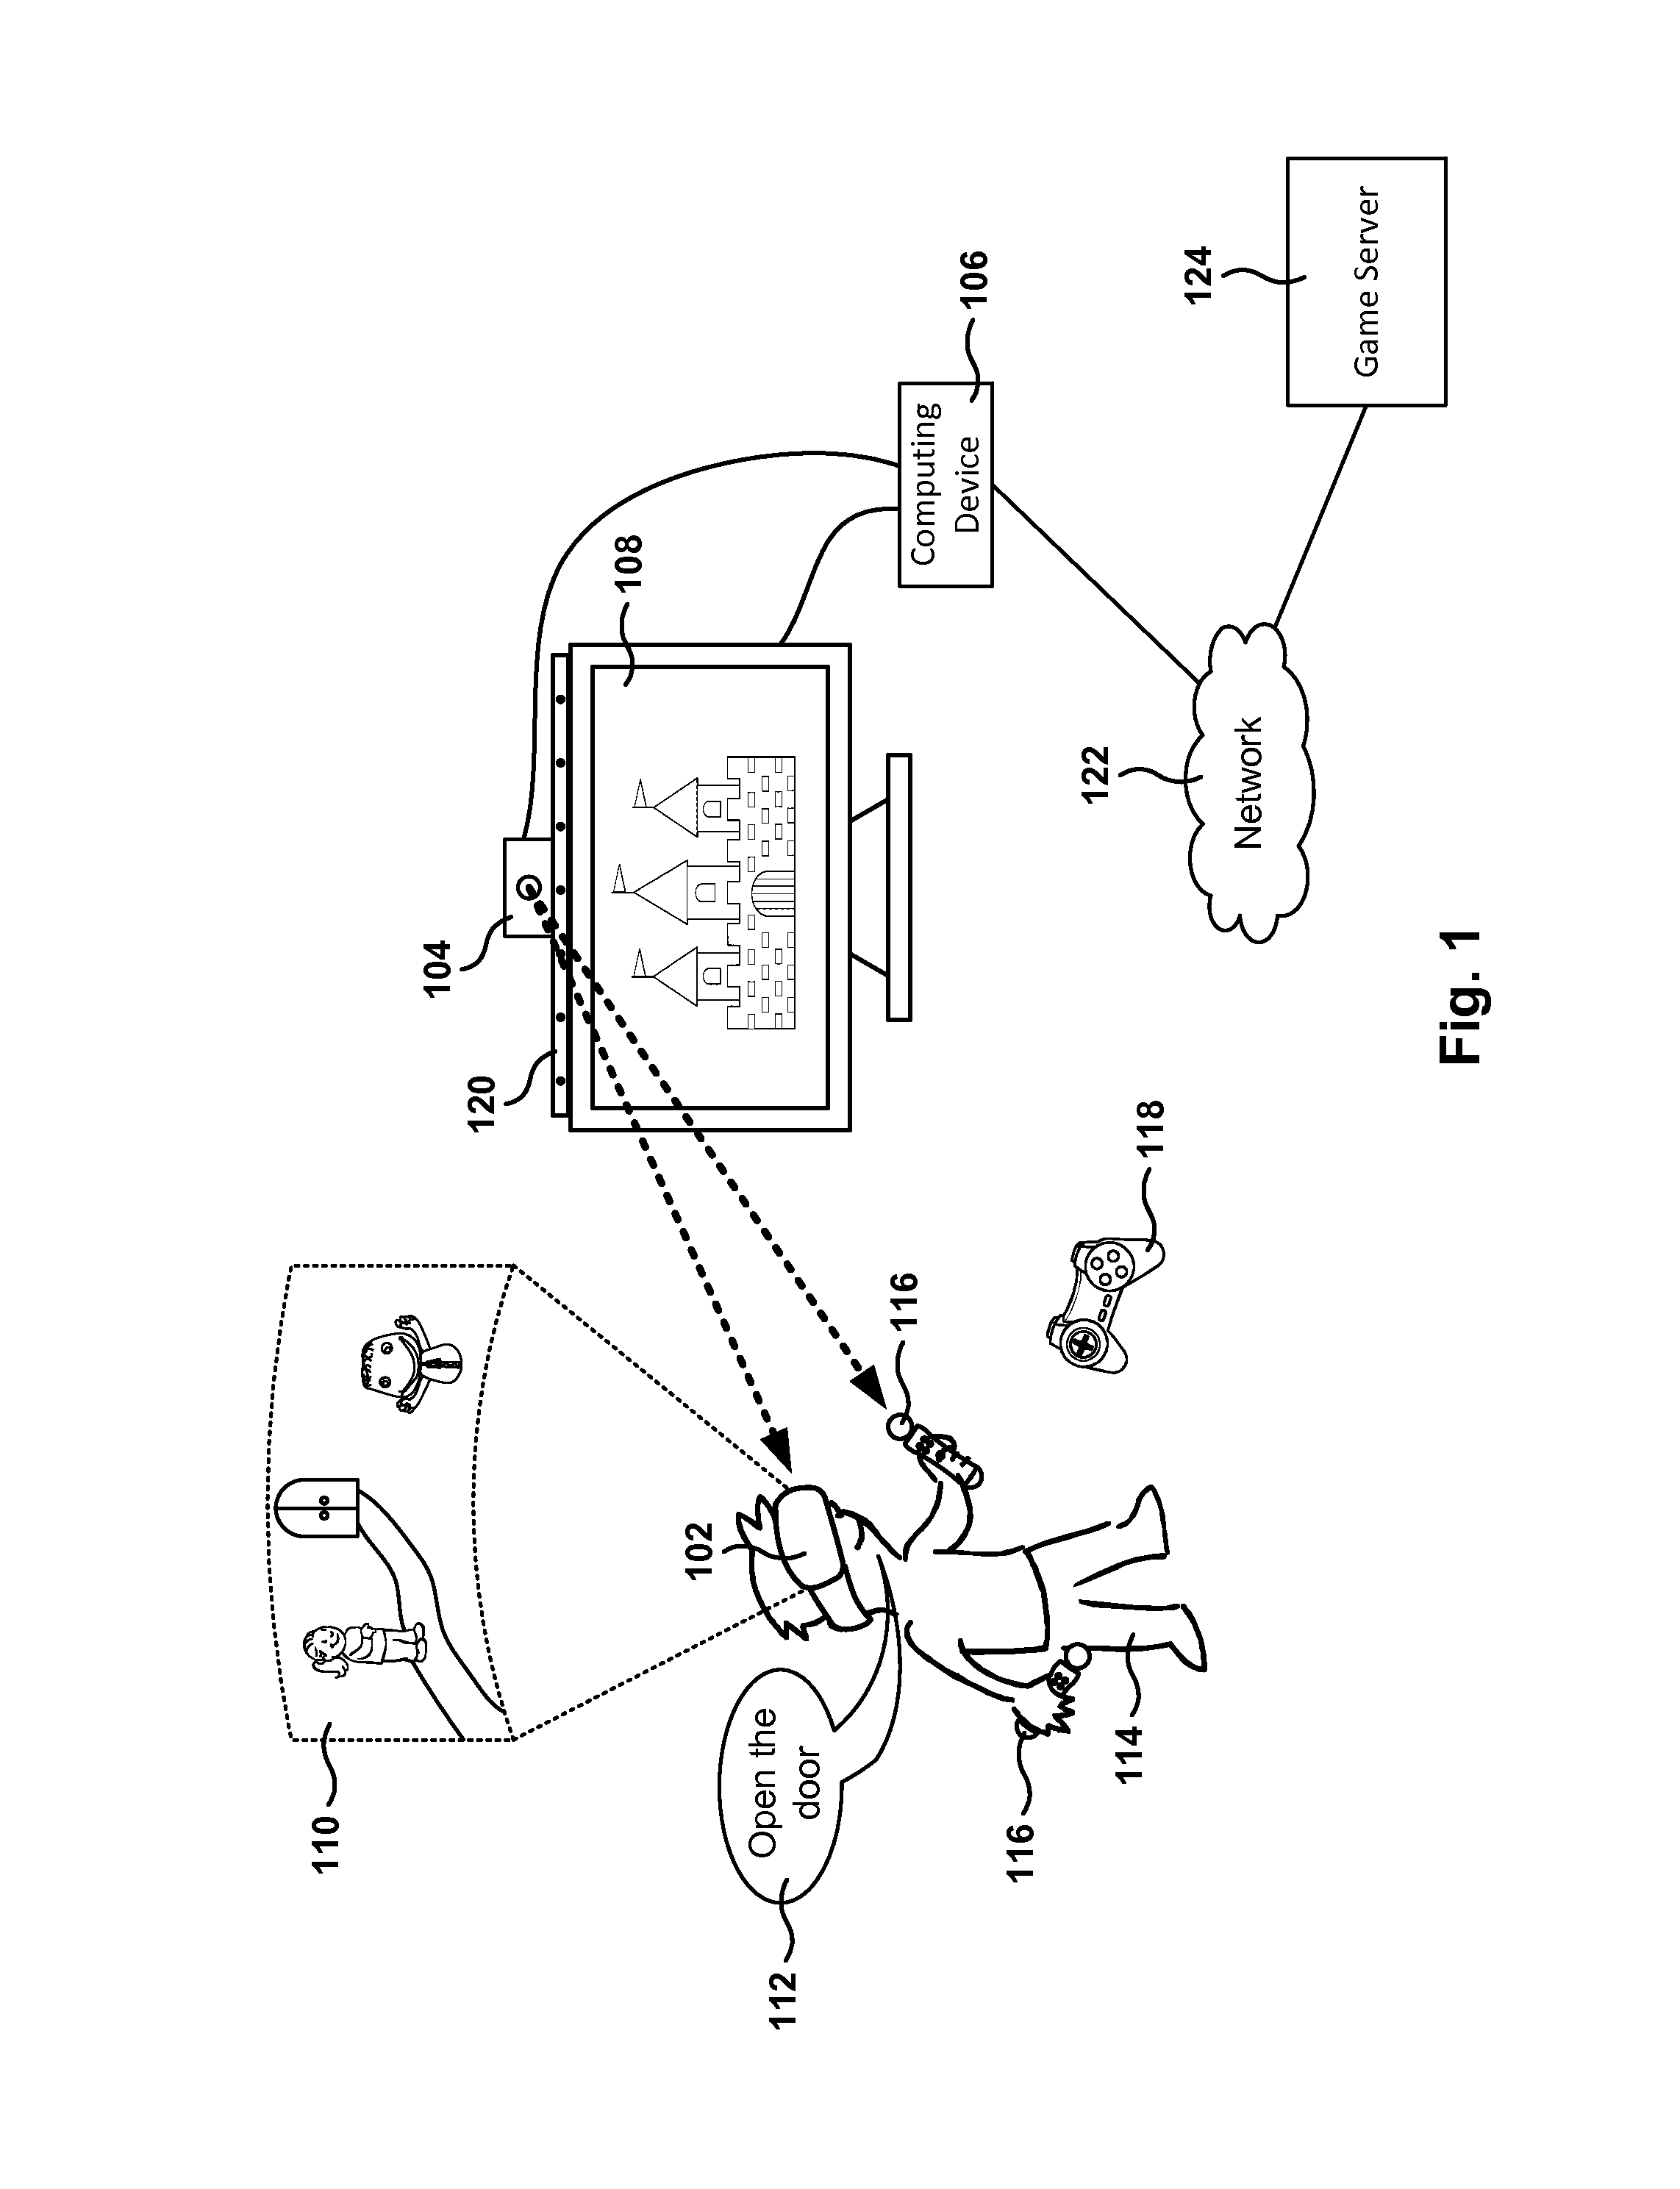 Image rendering responsive to user actions in head mounted display